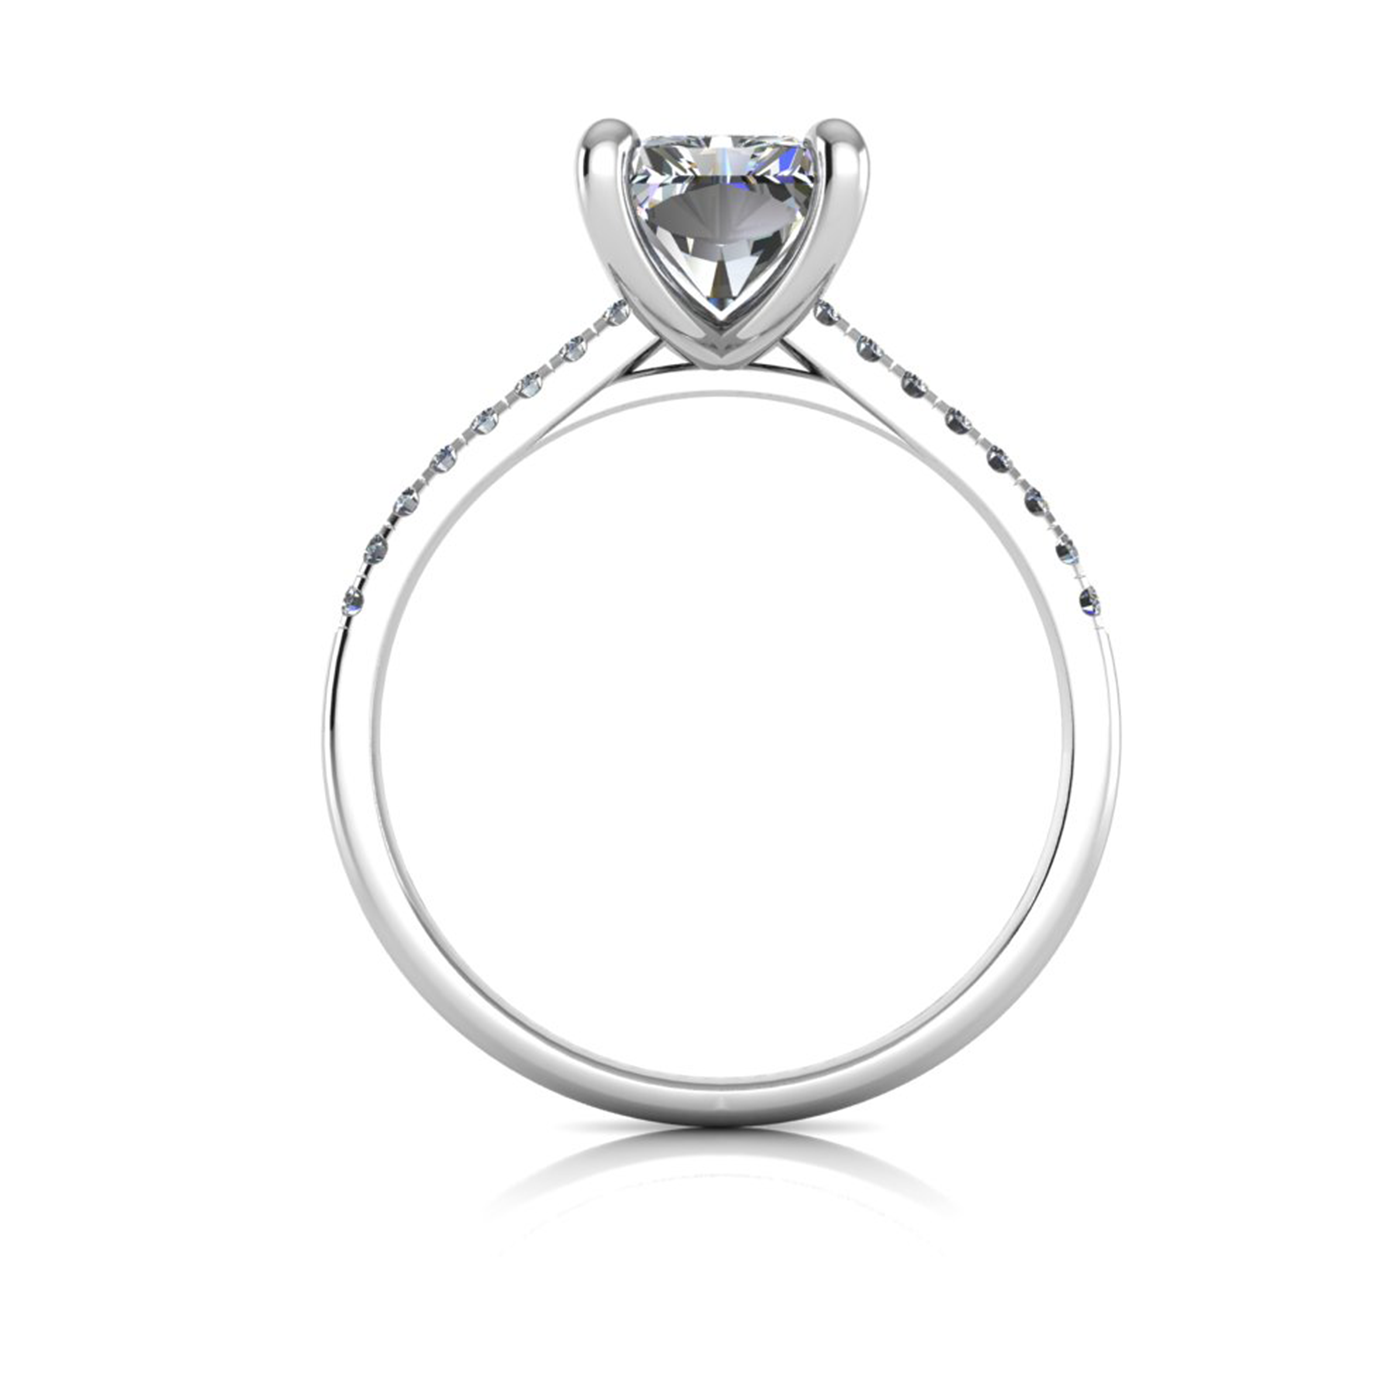 18k white gold  2,00 ct 4 prongs radiant cut diamond engagement ring with whisper thin pavÉ set band